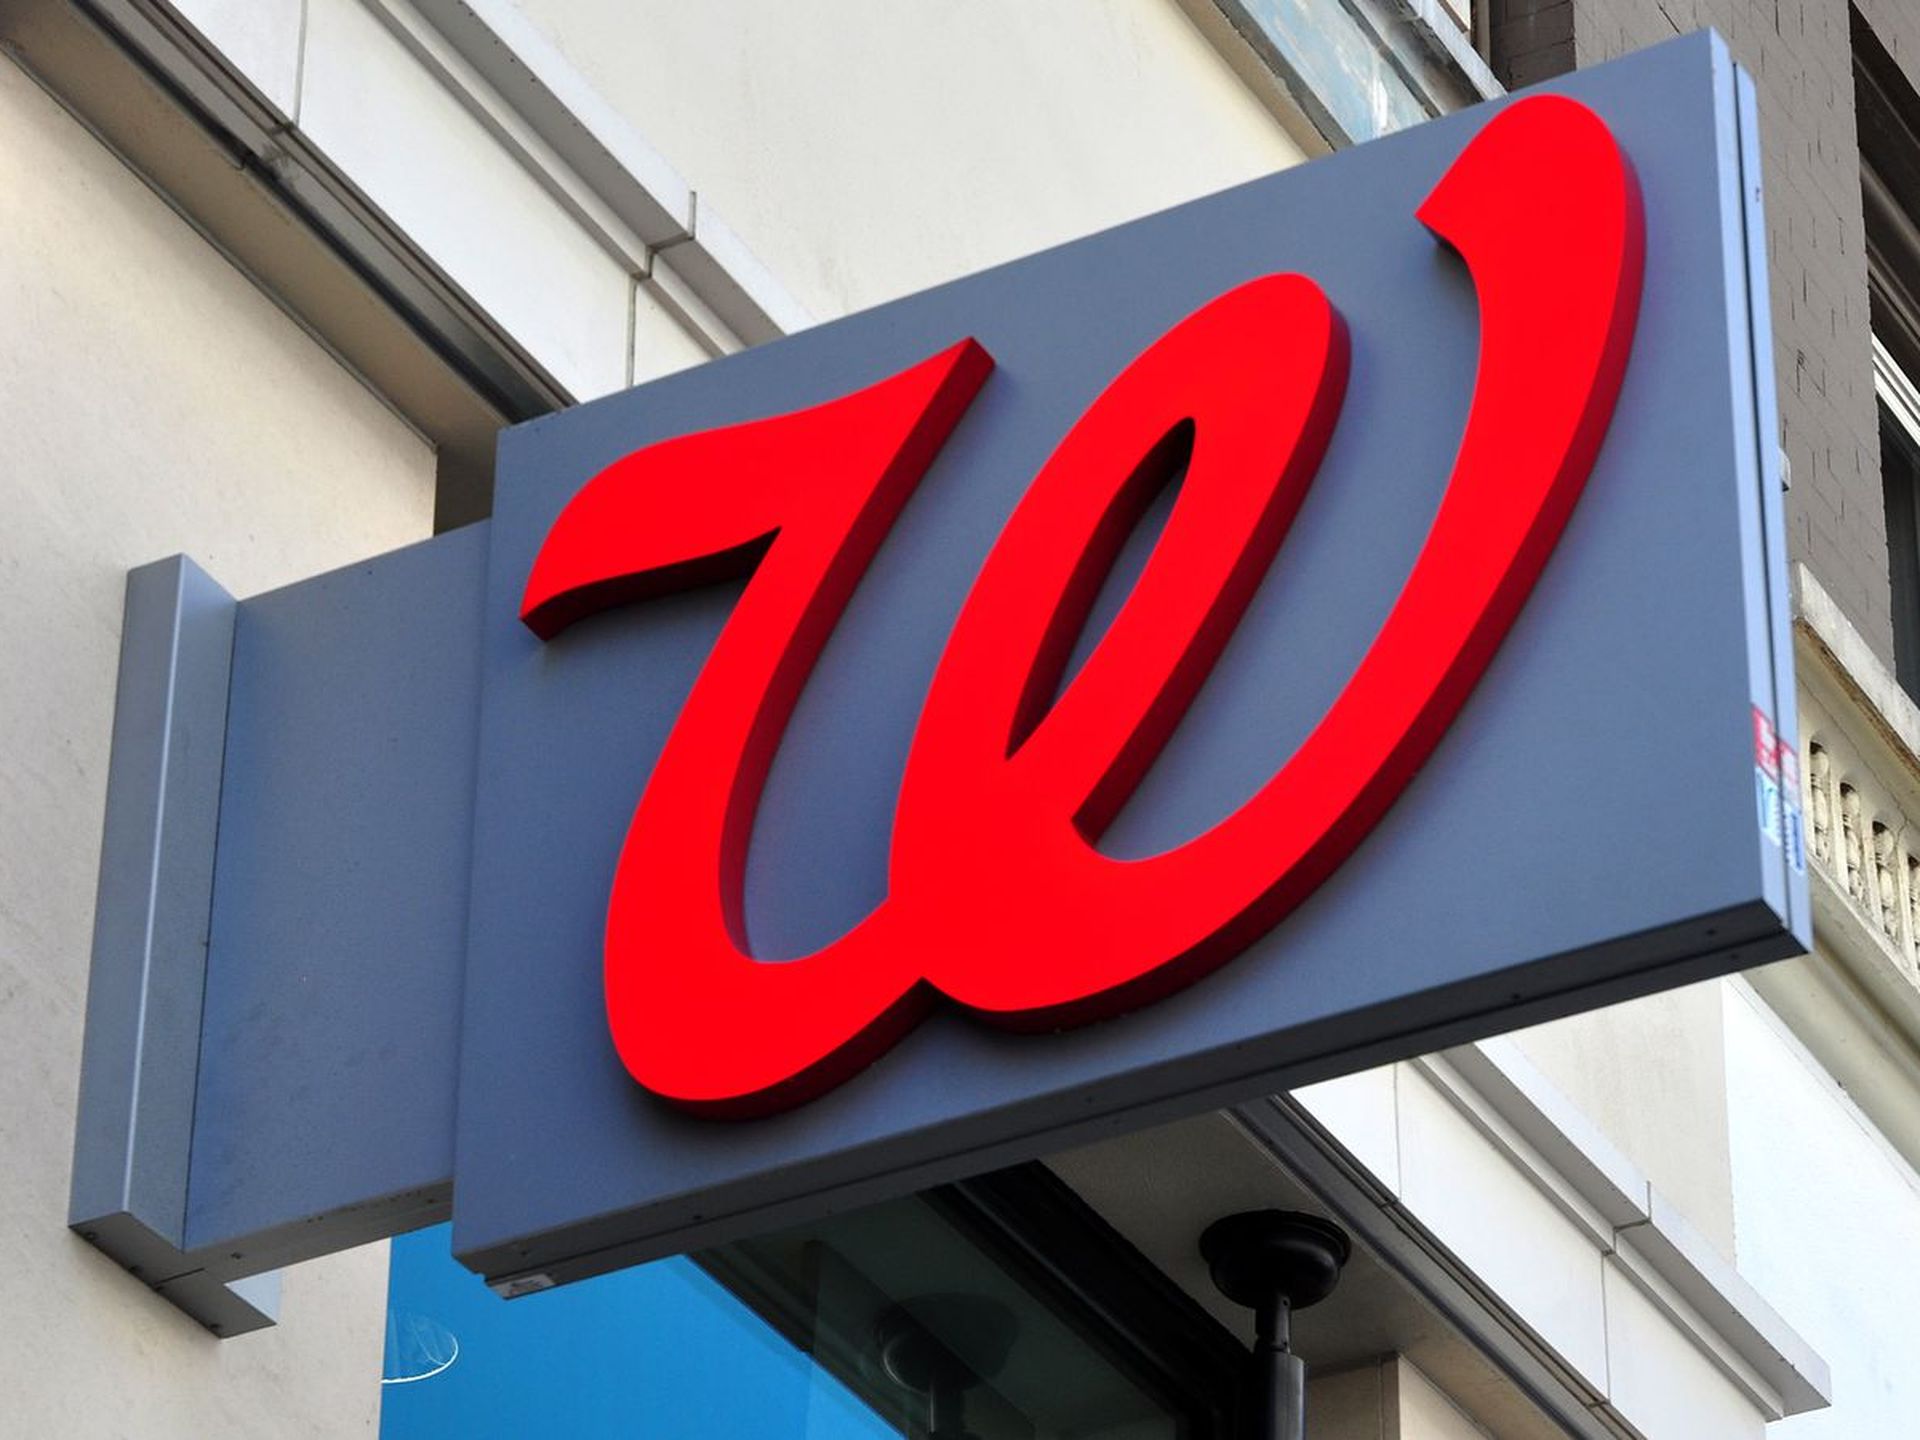 Walgreens gets into the clinical trials business